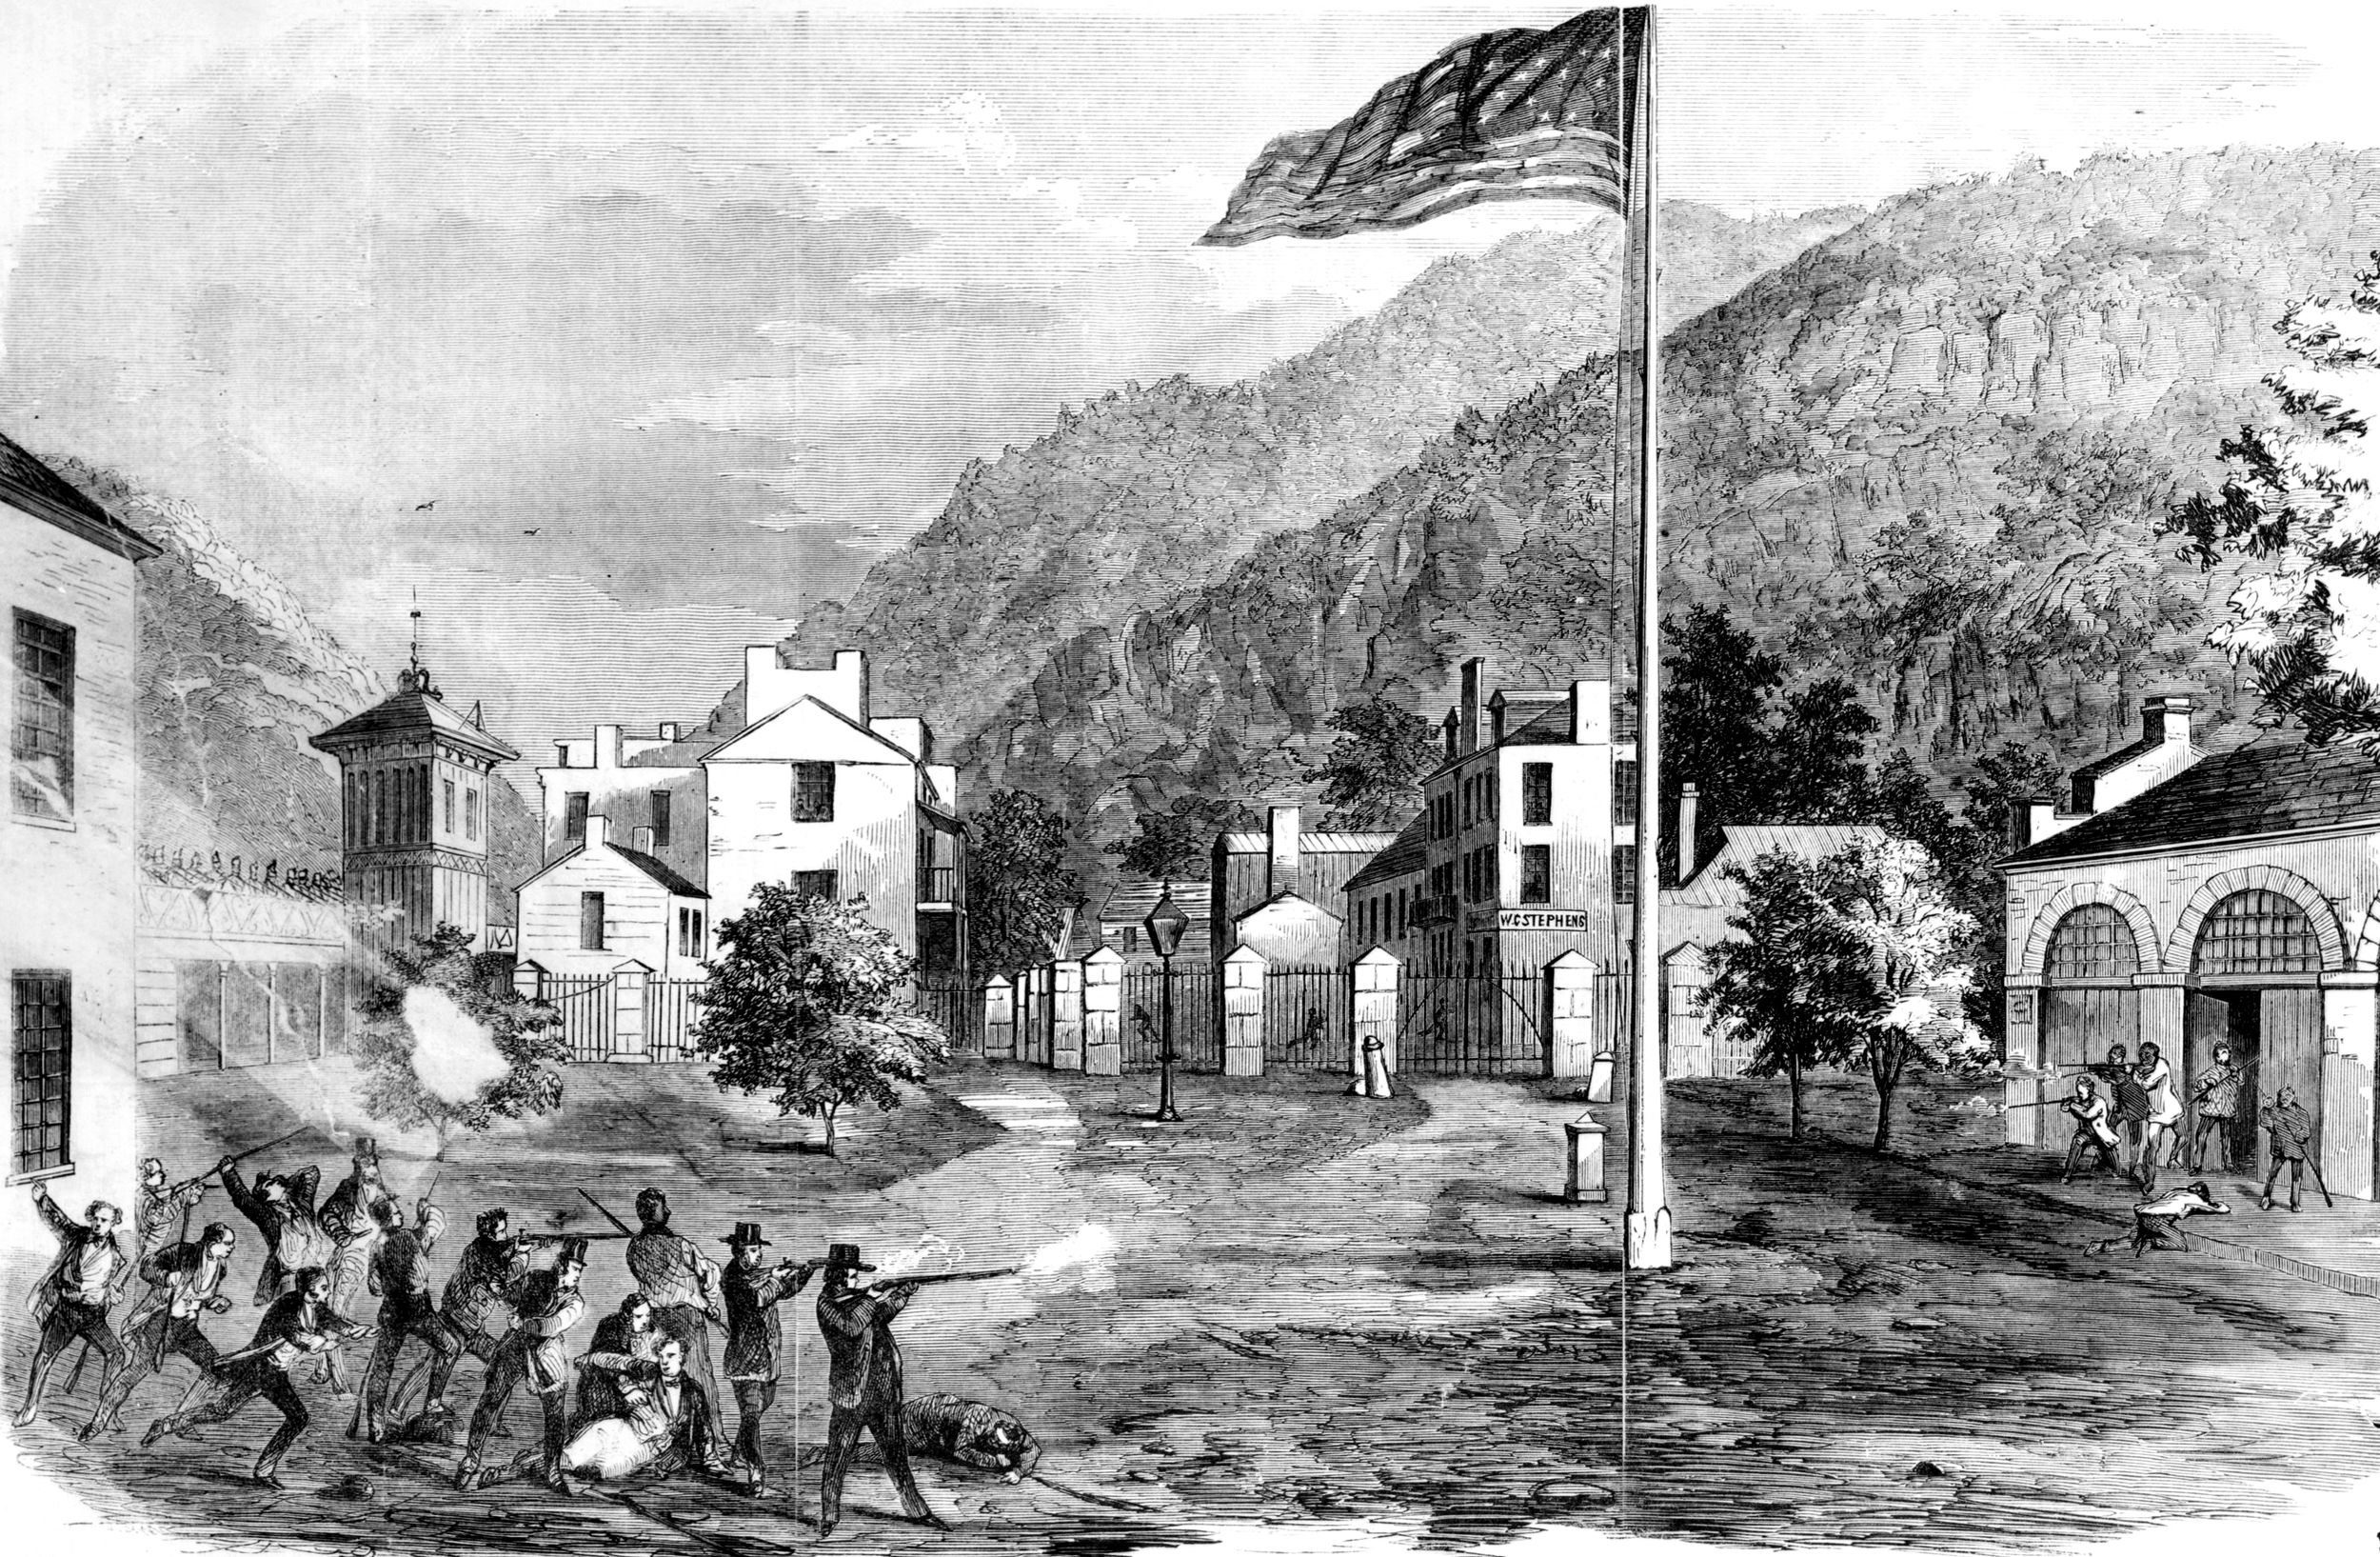 John Brown’s raiders clash with the militia on Monday, October 17, in this image from Frank Leslie's Illustrated Newspaper. Initially enthusiastic, the local militia fired on Brown’s men outside the Armory’s engine house (on right). The militia’s members were later described as being poorly armed, disorderly, cowardly, and, at times, roaring drunk by the time Col. Robert E. Lee and the U.S. Marines captured Brown on Tuesday, October 18.